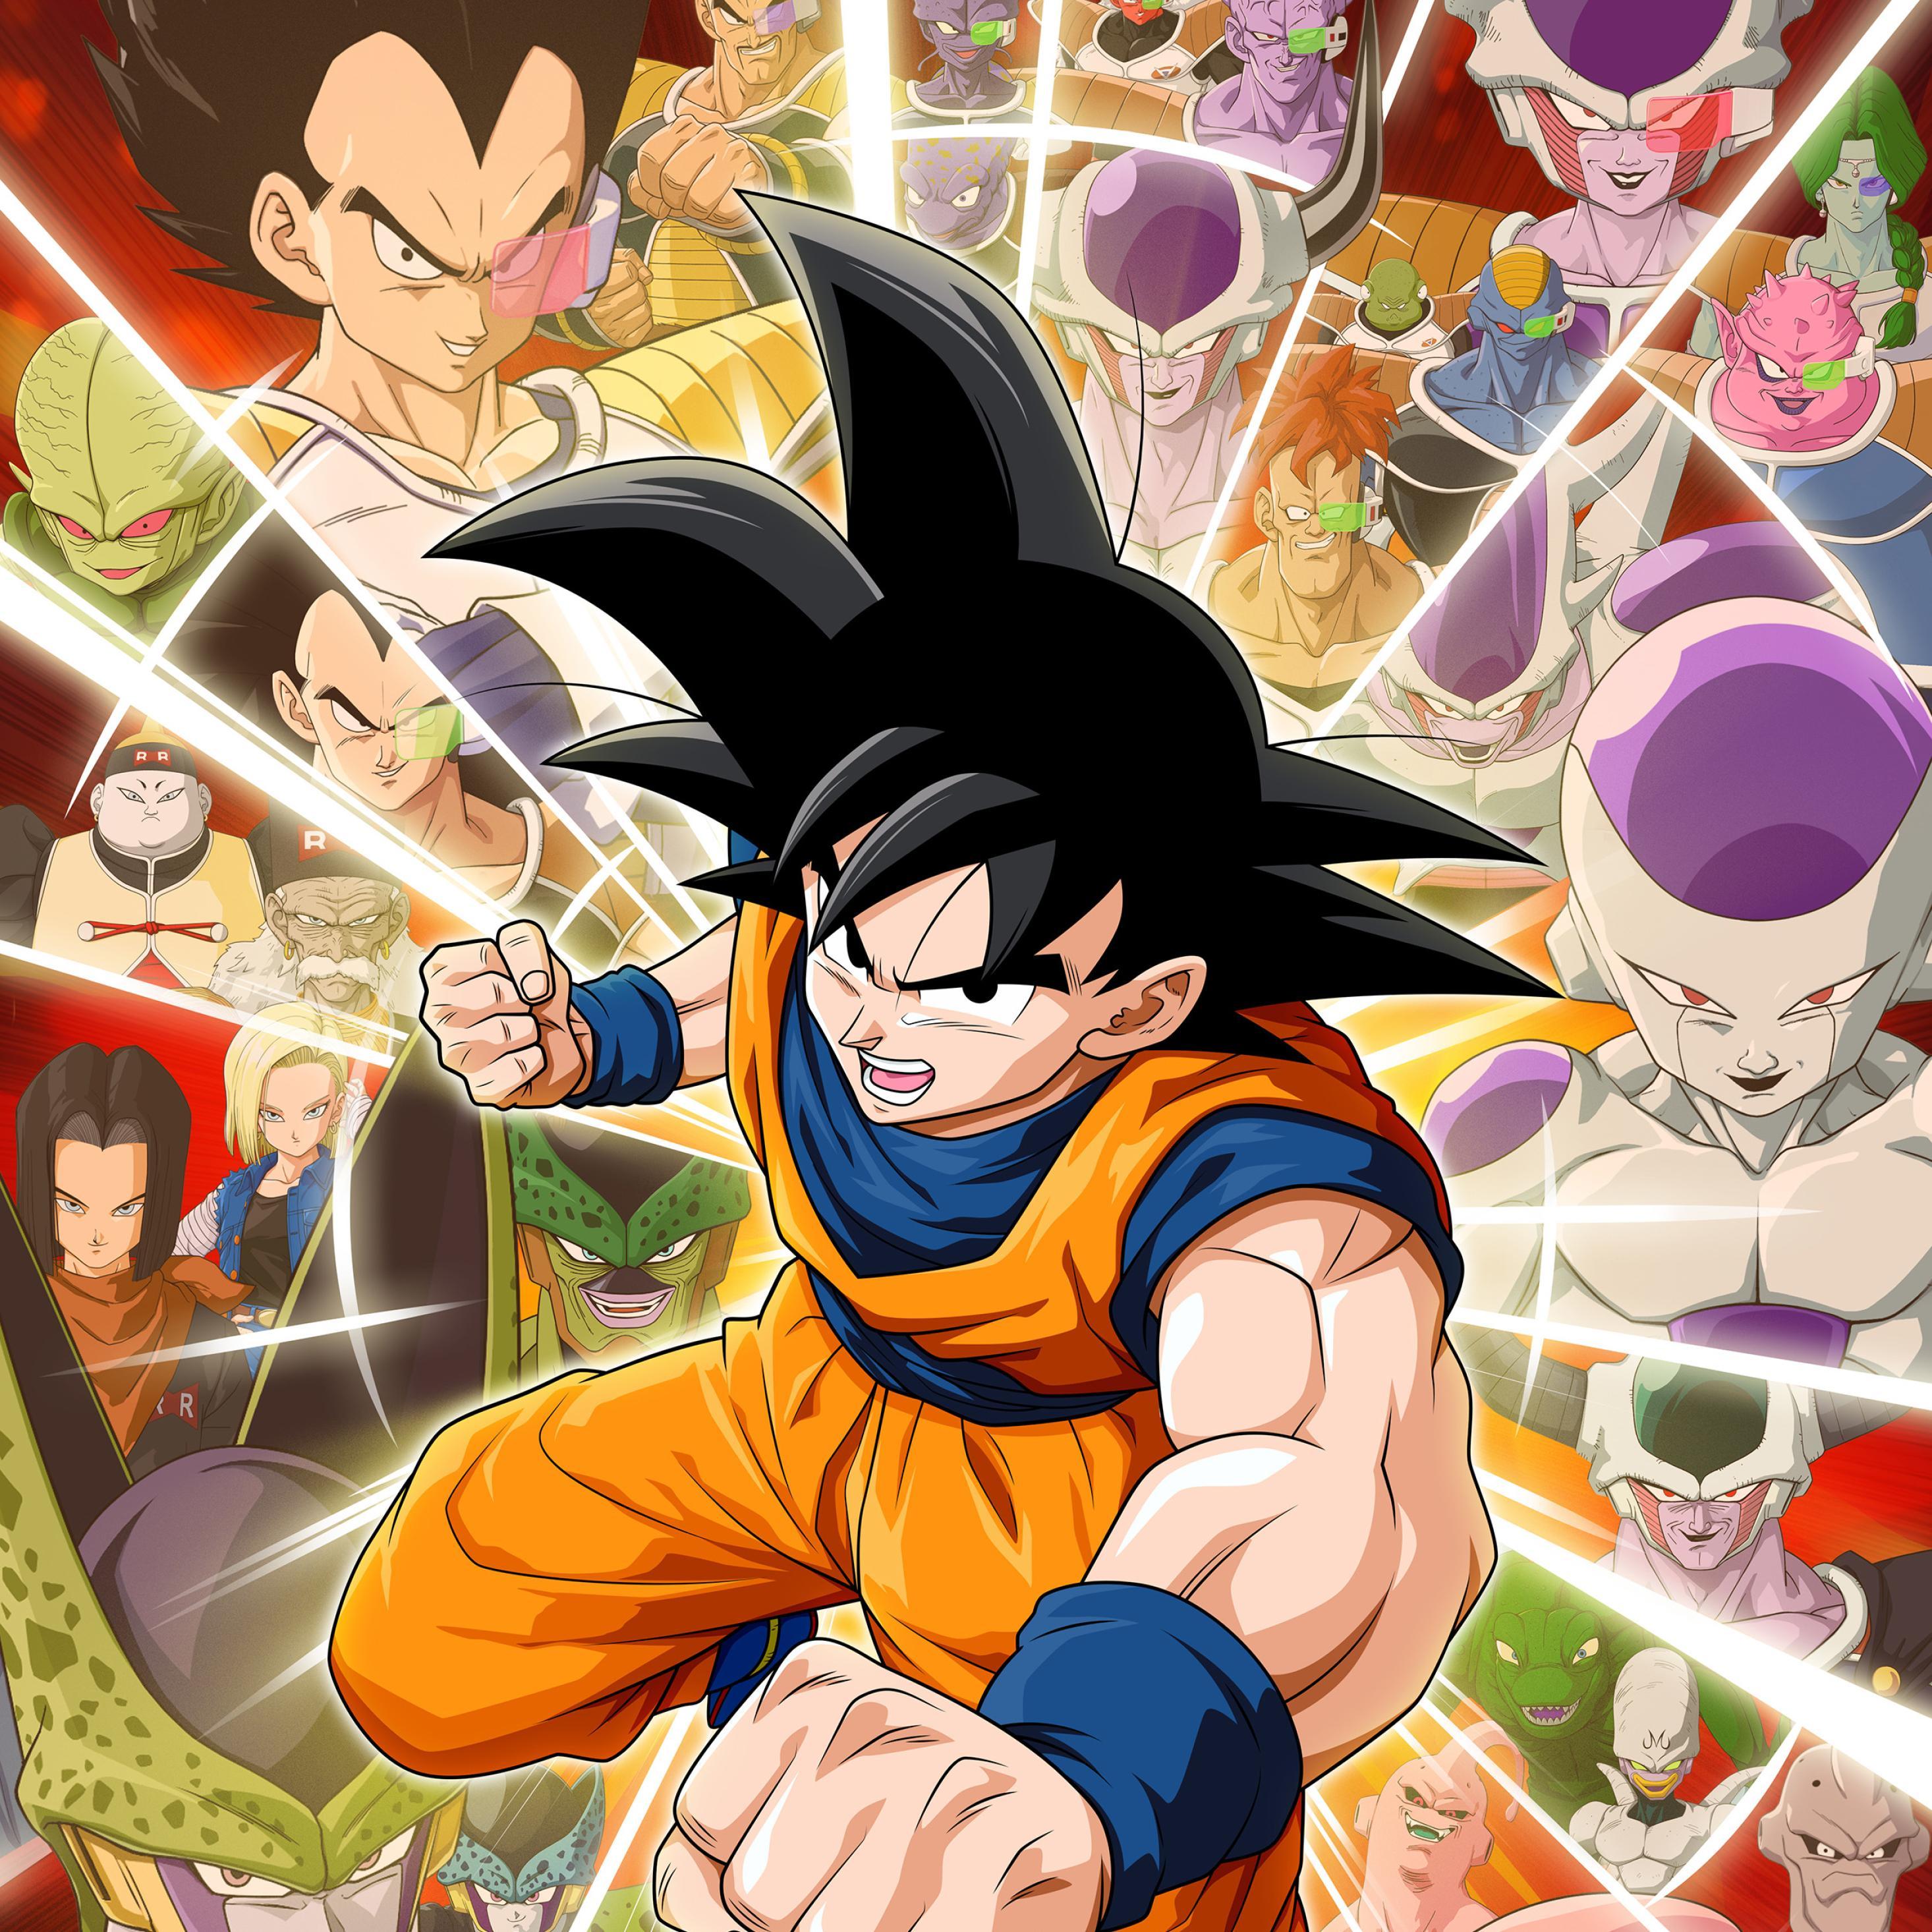 Tons of awesome Dragon Ball Z aesthetic PS4 wallpapers to download for free...